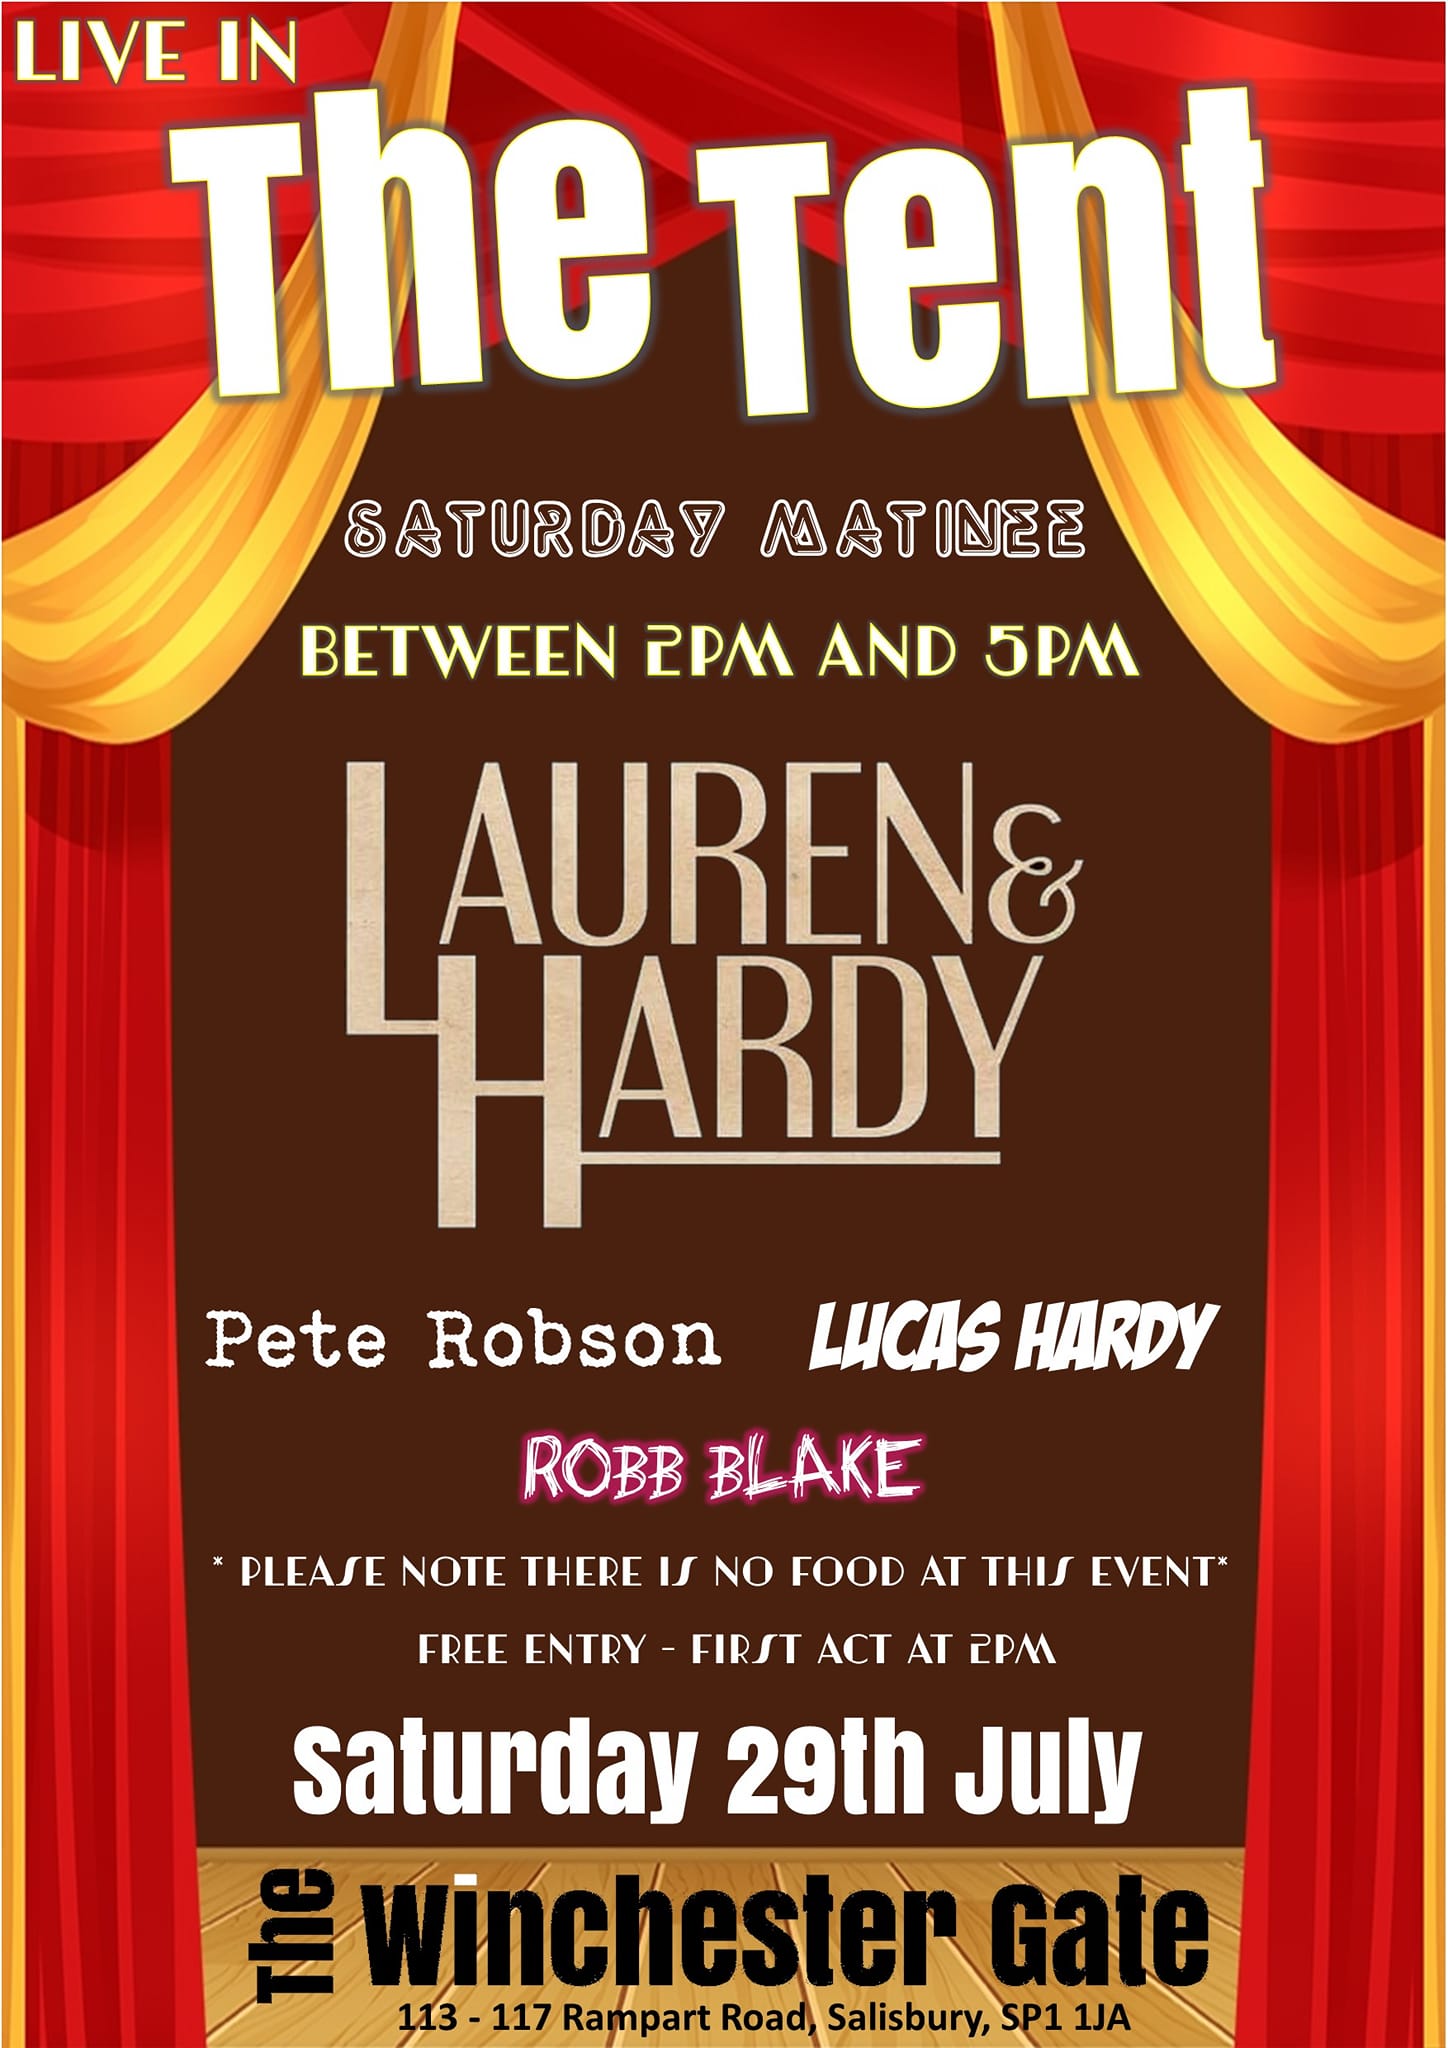 Live in the Tent: LAUREN & HARDY + Pete Robson + Lucas Hardy + Robb Blake